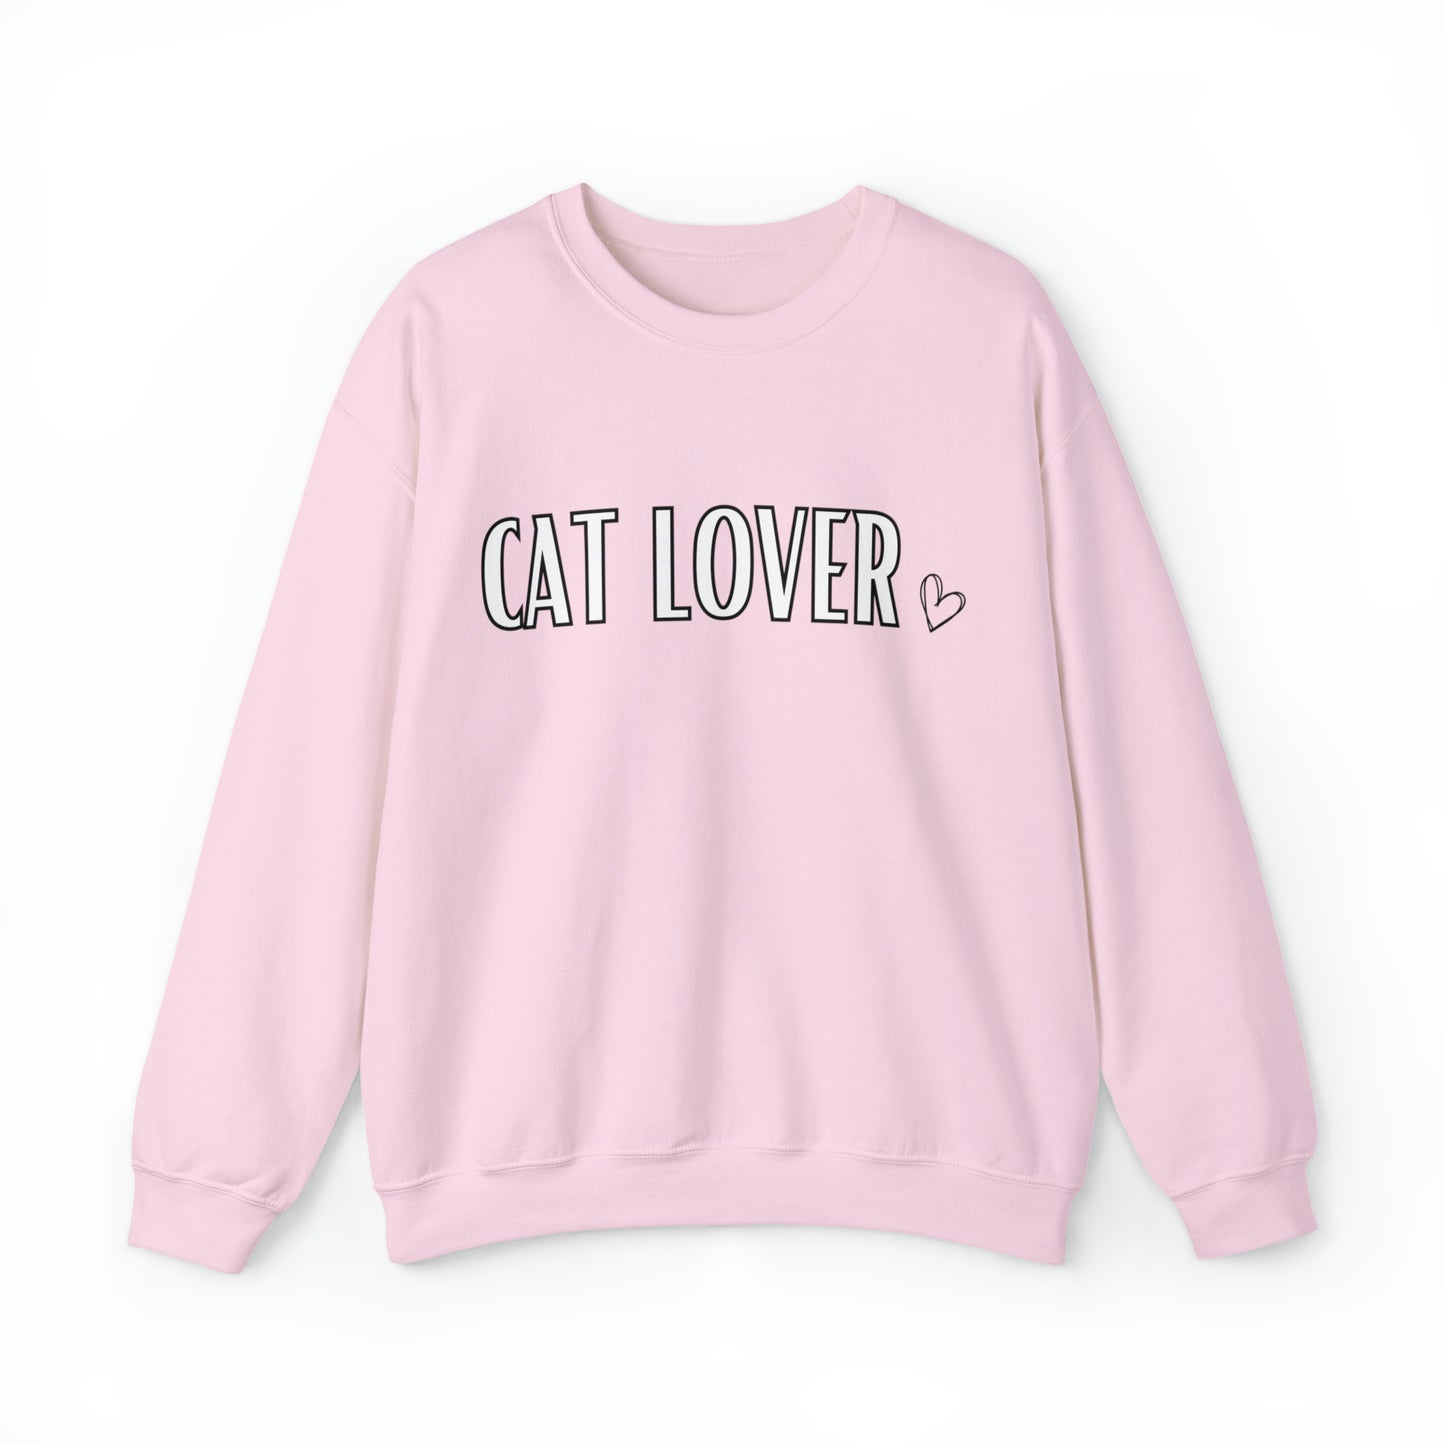 CAT LOVER, Heavy Blend™ Crewneck Sweatshirt (Available In Other Colors)